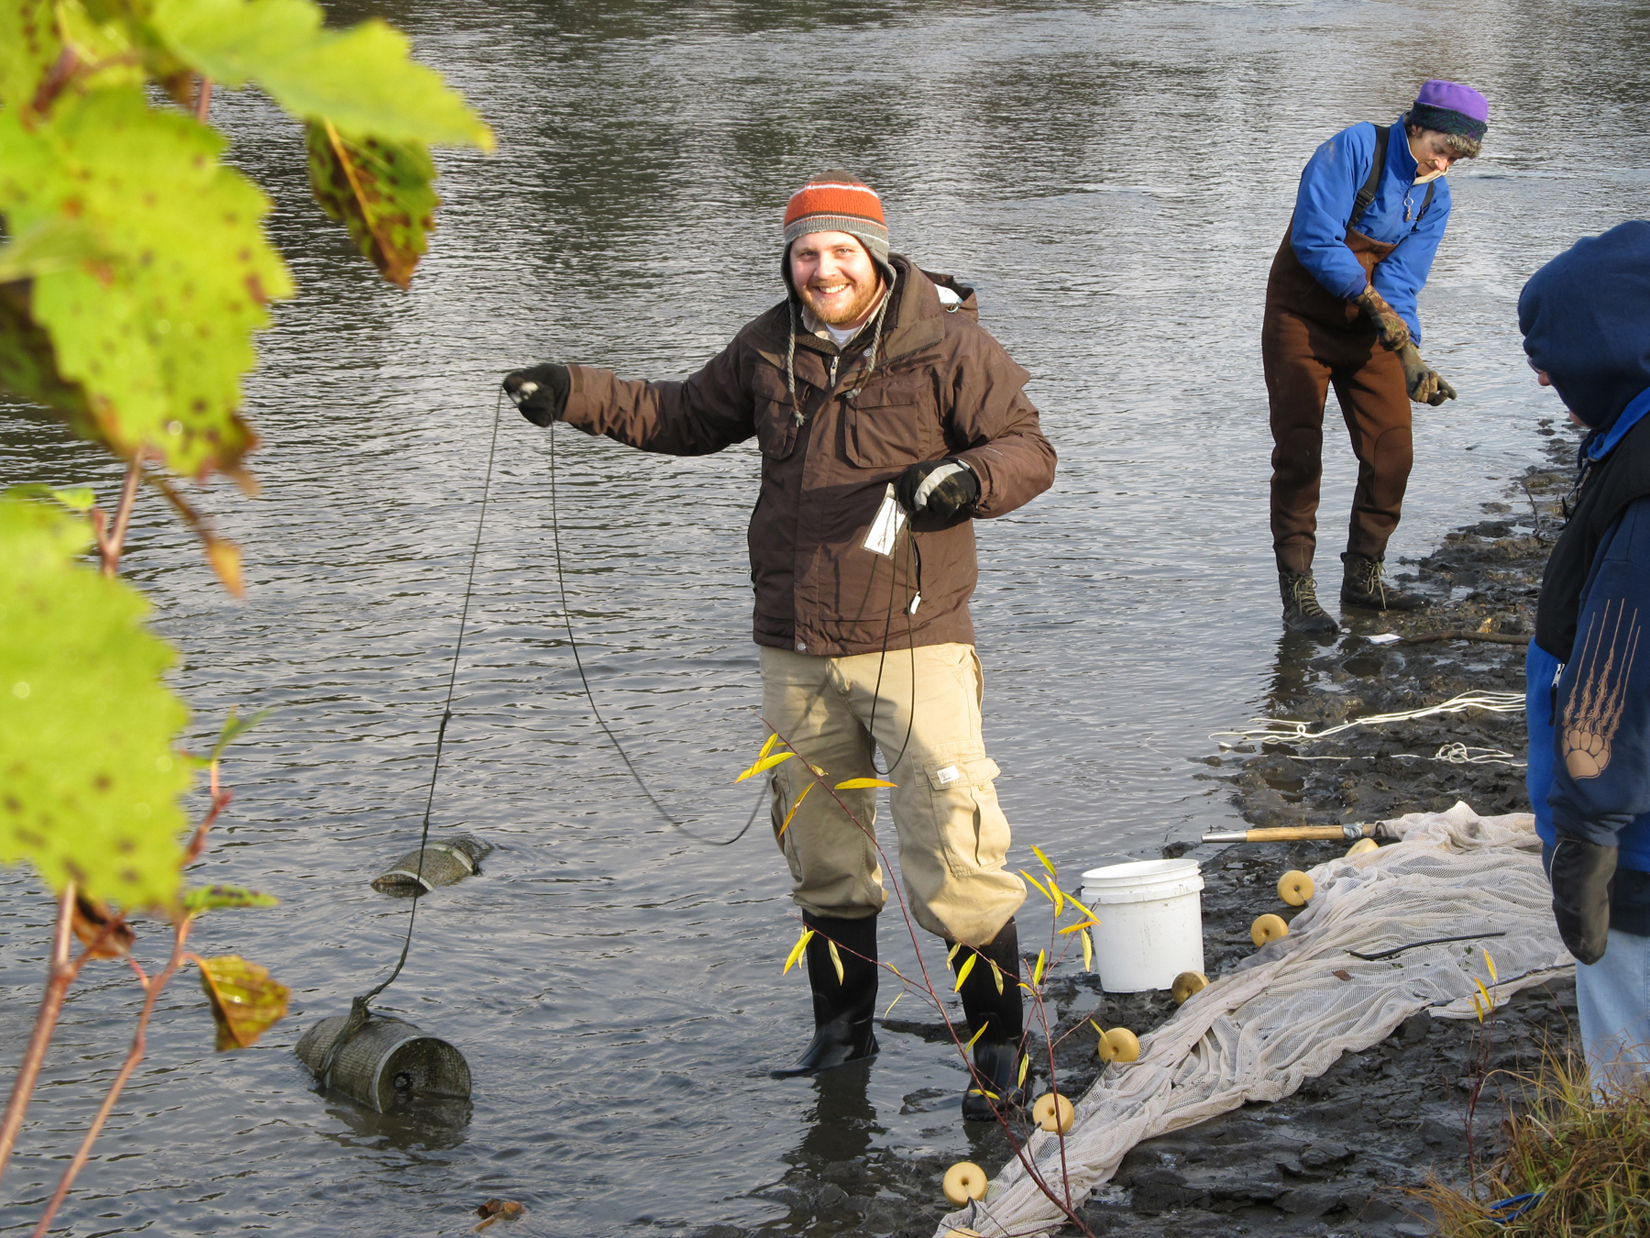 Photo by Peter Stortz. Richard Bierer, a teacher from the Southwest Alaska community of Levelock, learns fish-sampling techniques using minnow traps and seine nets on the Chena River during the 2011 teacher in-service